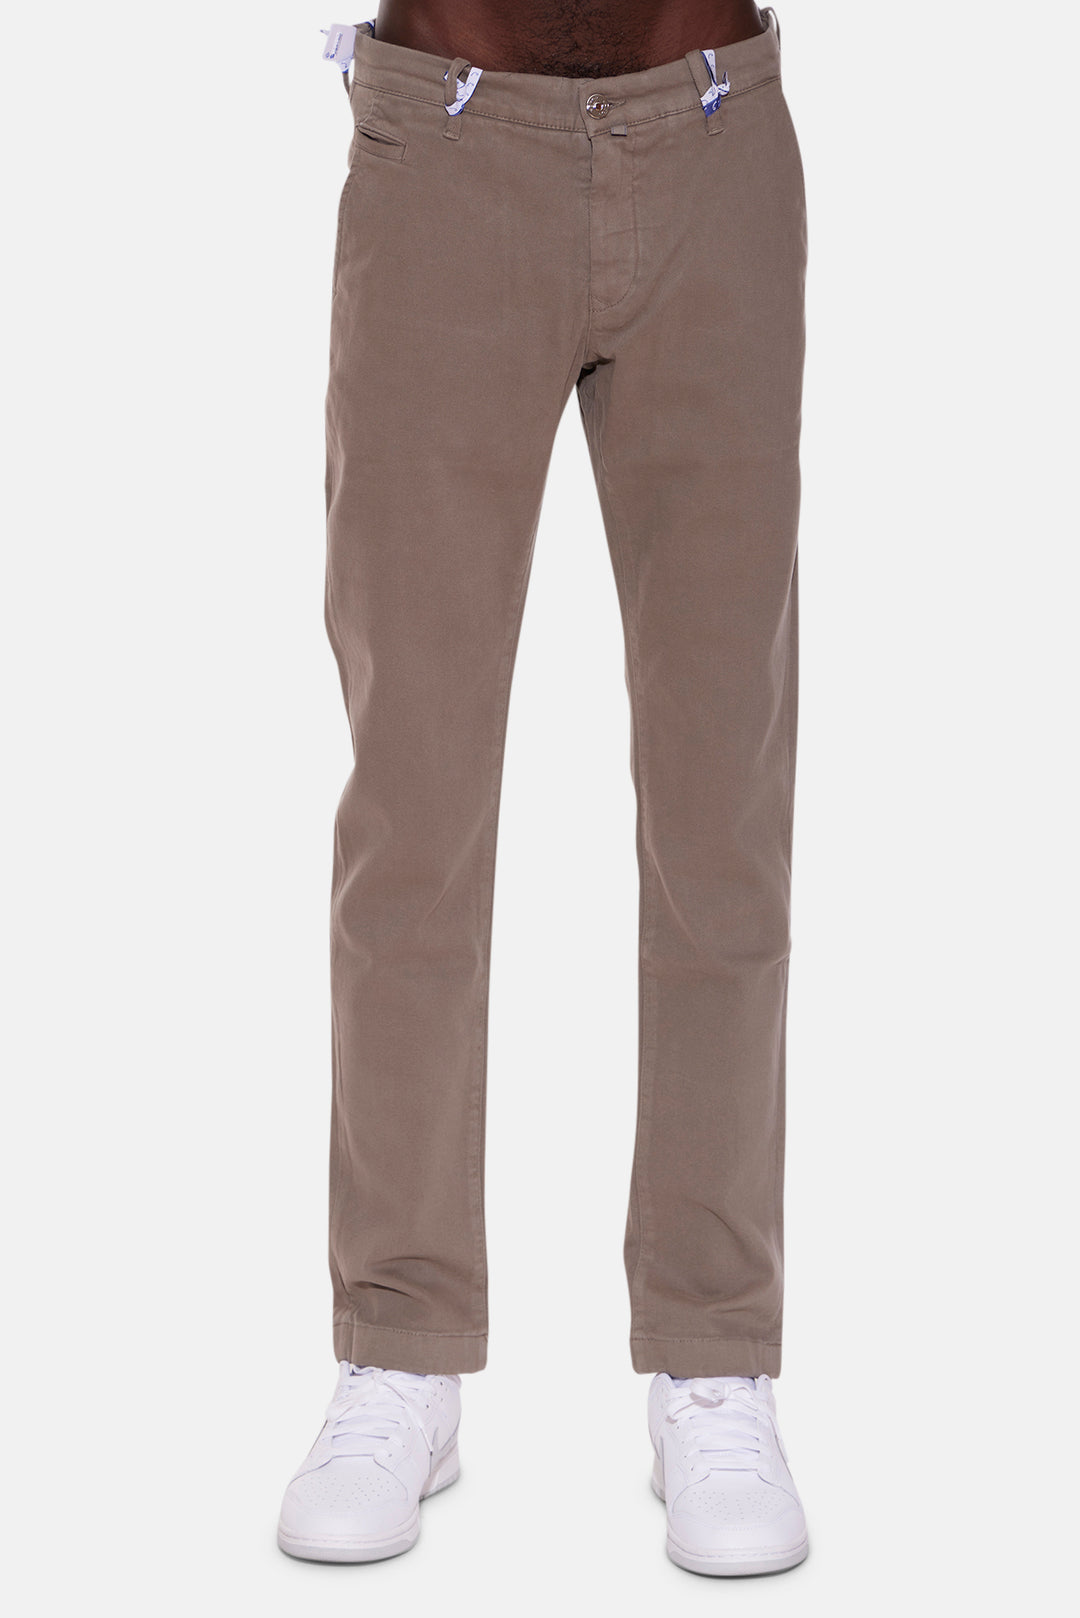 Bard Textured 5 Pkt Taupe